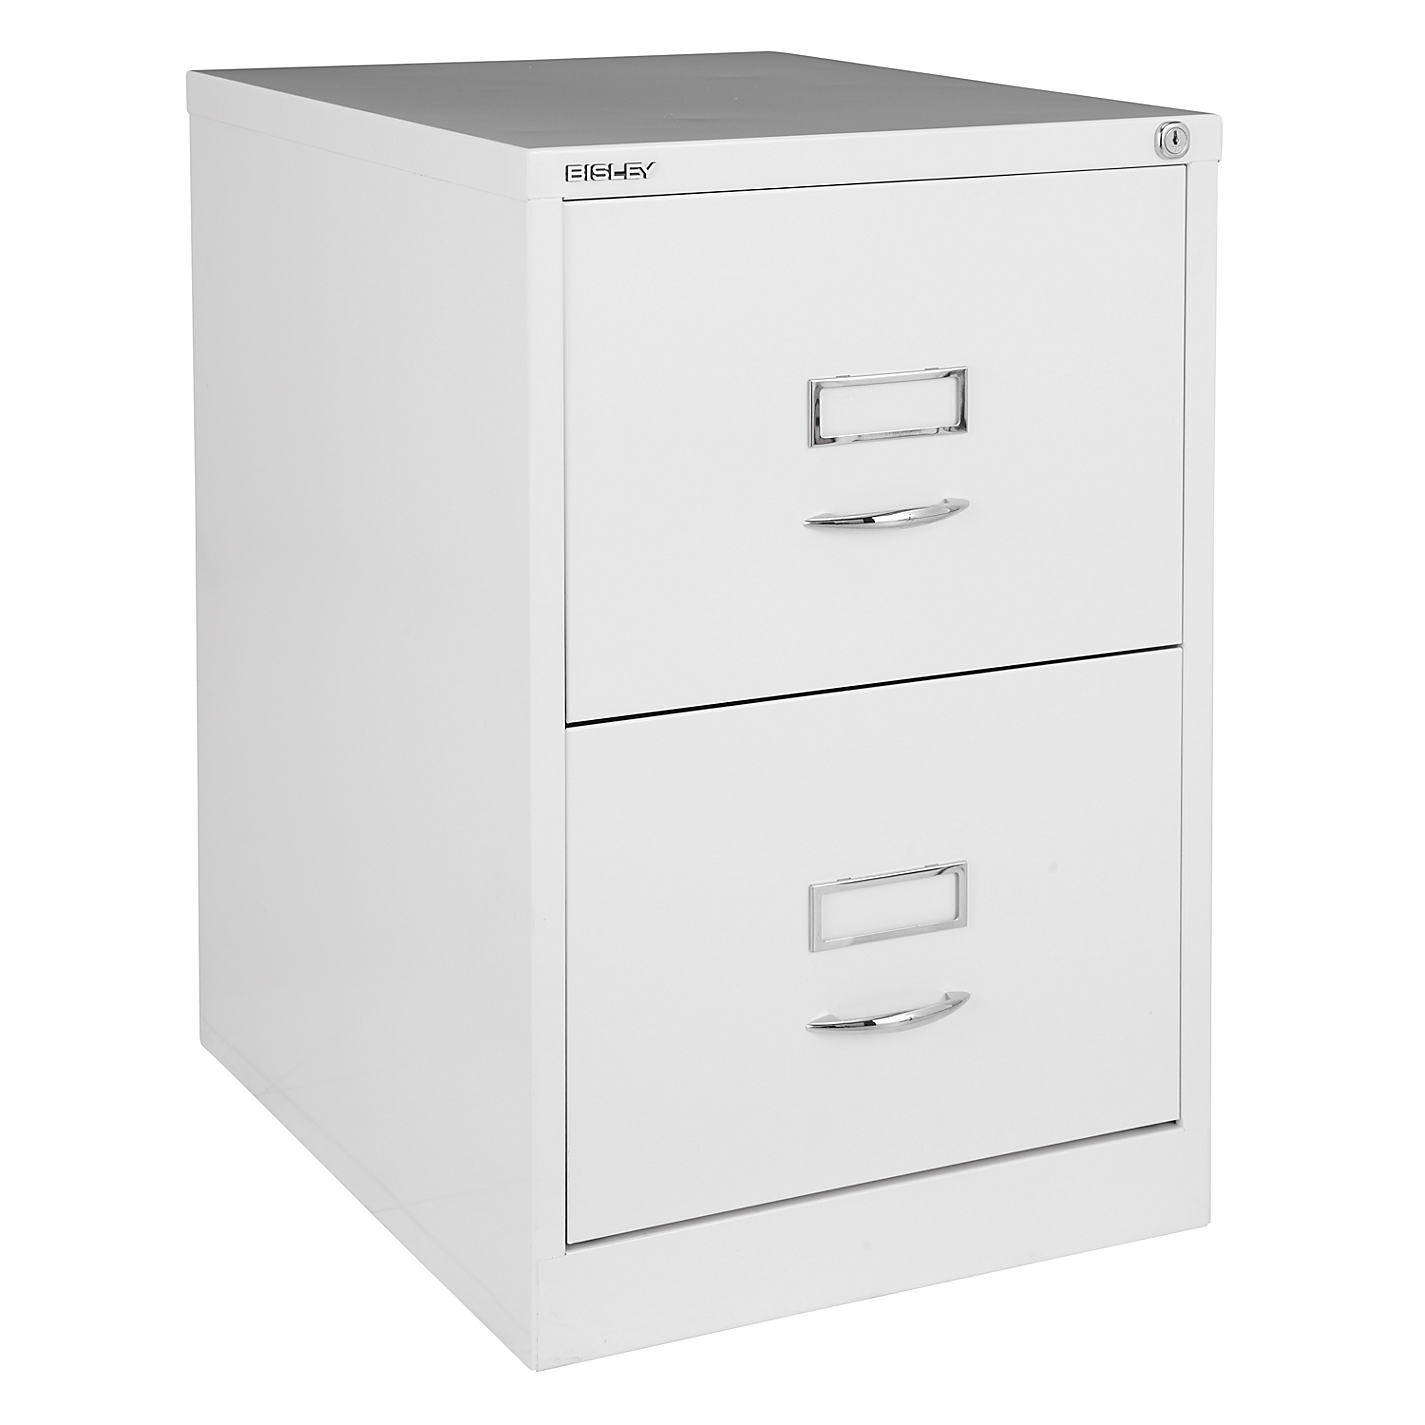 Incredible Small Metal Filing Cabinet Hon Filing Cabinets Old Filing for proportions 1425 X 1425